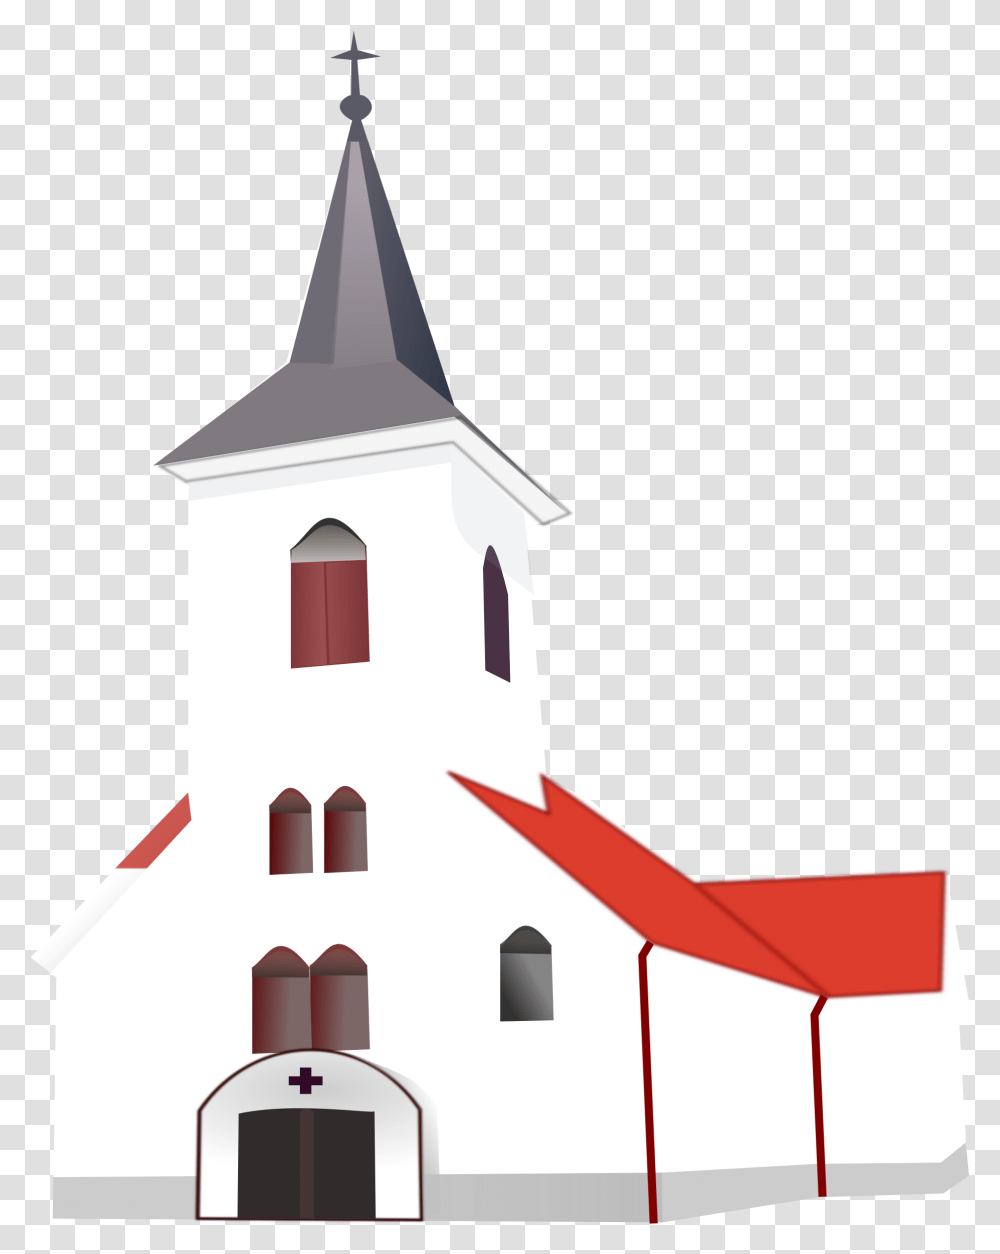 Graphic Designer Traits For Church, Architecture, Building, Tower, Spire Transparent Png